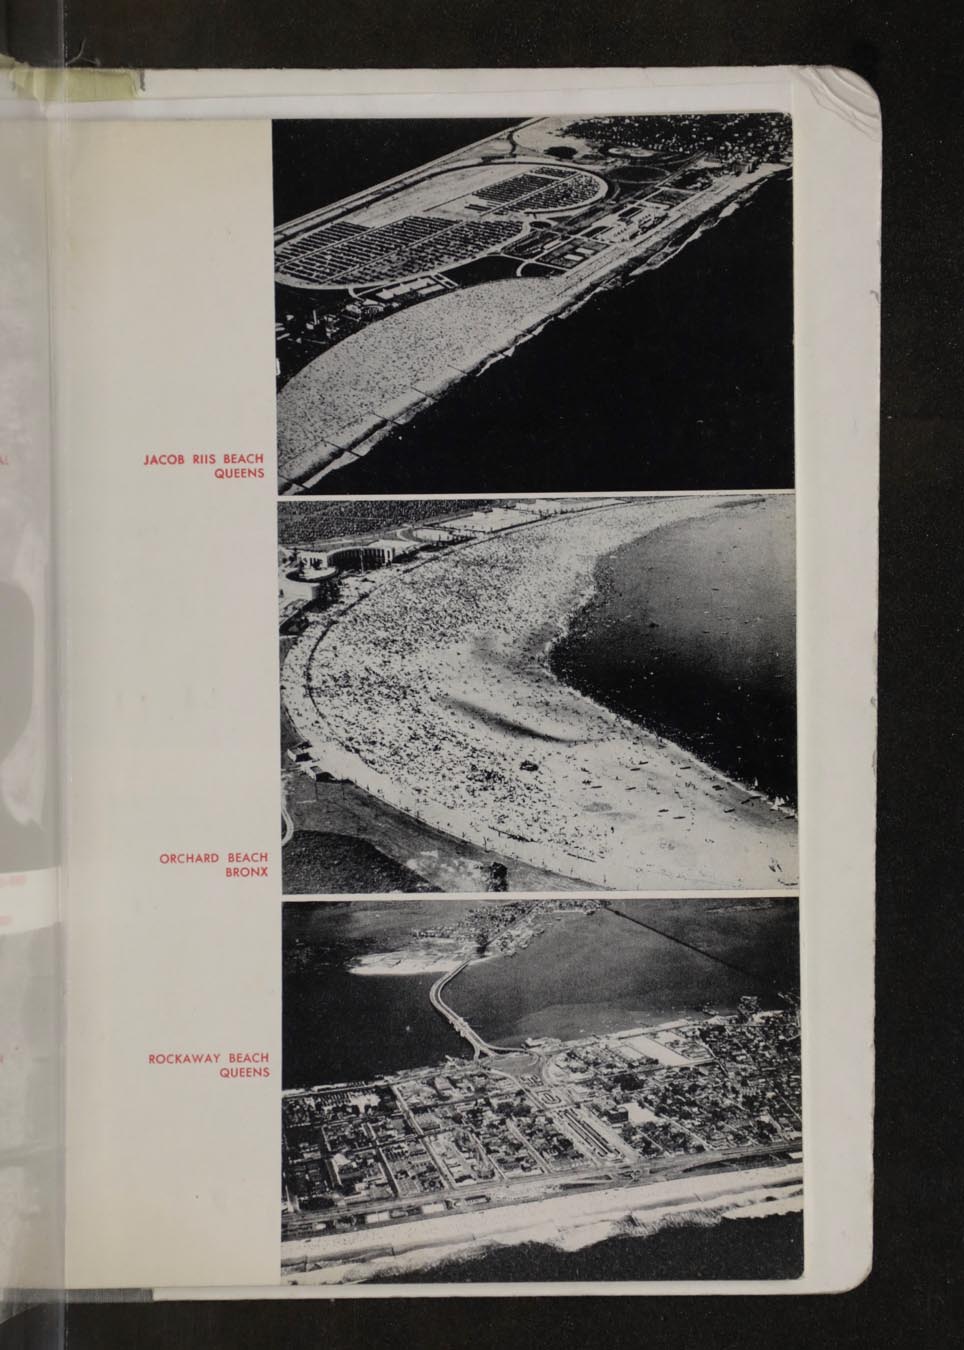 Page from the 1962 NYC Dpartment of Parks Annual Report.